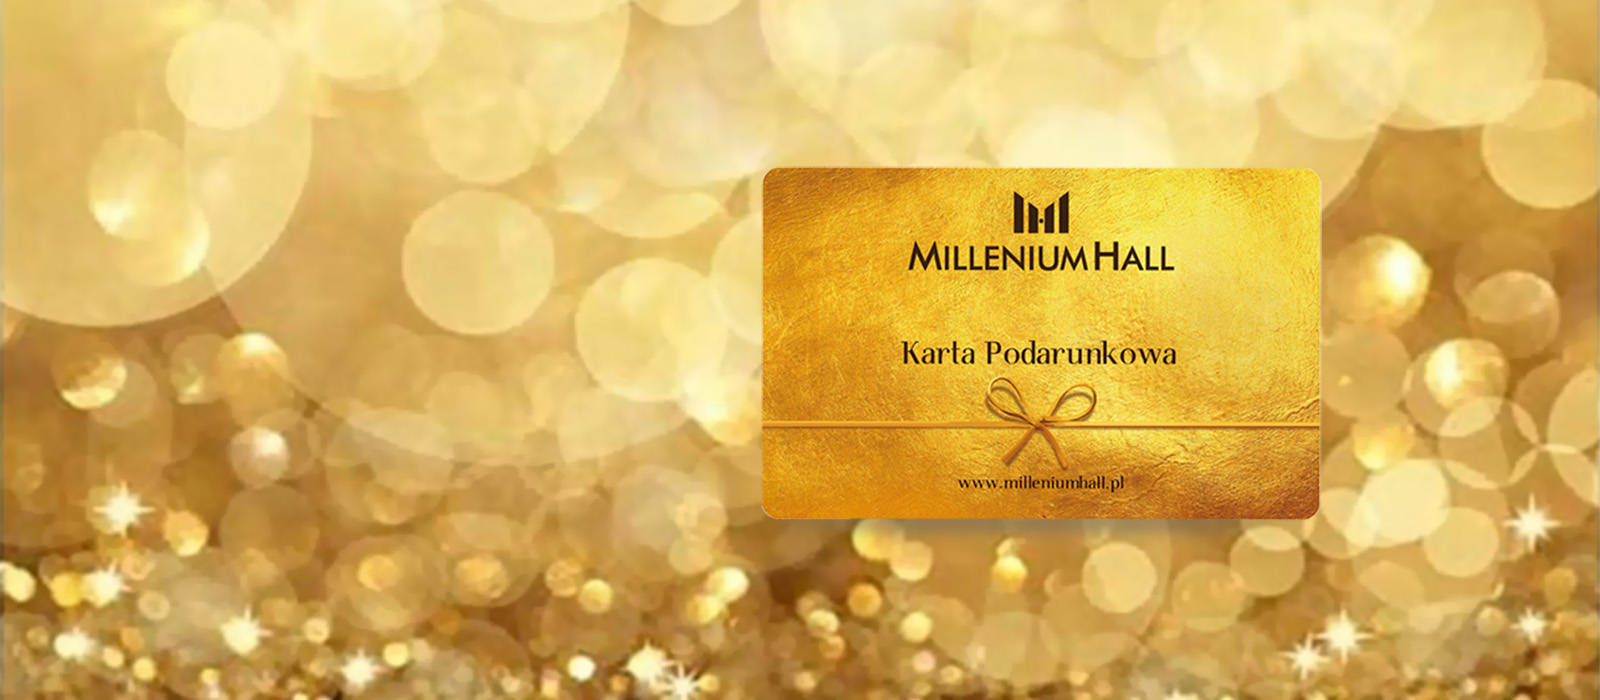 ALWAYS A HIT GIFT! Millenium Hall Gift Card!